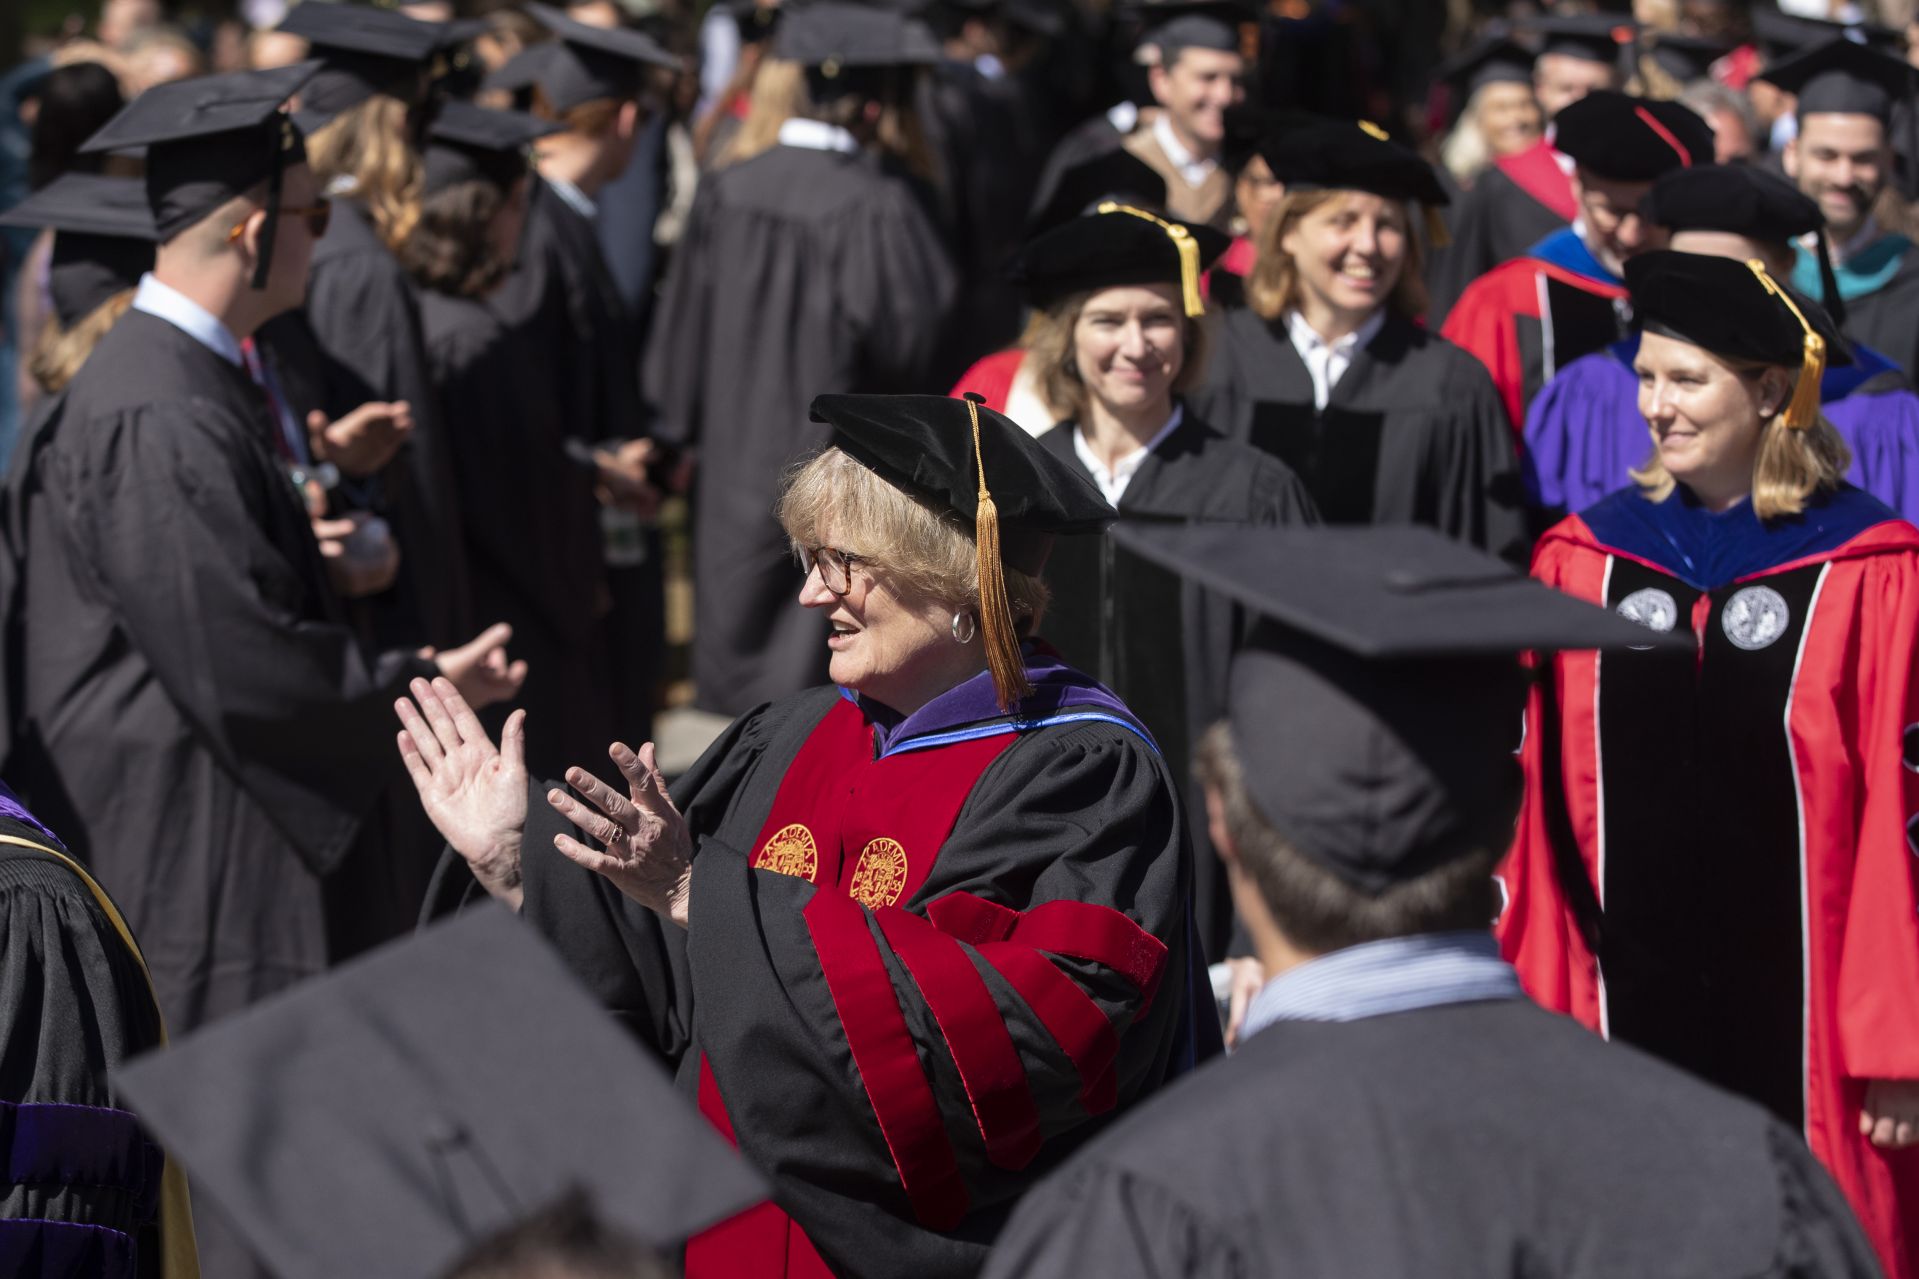 Bates College 2019 Commencement (the one hundred and fifty-third) on the Historic Quad, at which Travis Mills receives an Doctor of Humane Letter. Placing the collar on Mills is the college's mace bearer, Charles Franklin Phillips Professor of EconomicsMichael Murray.